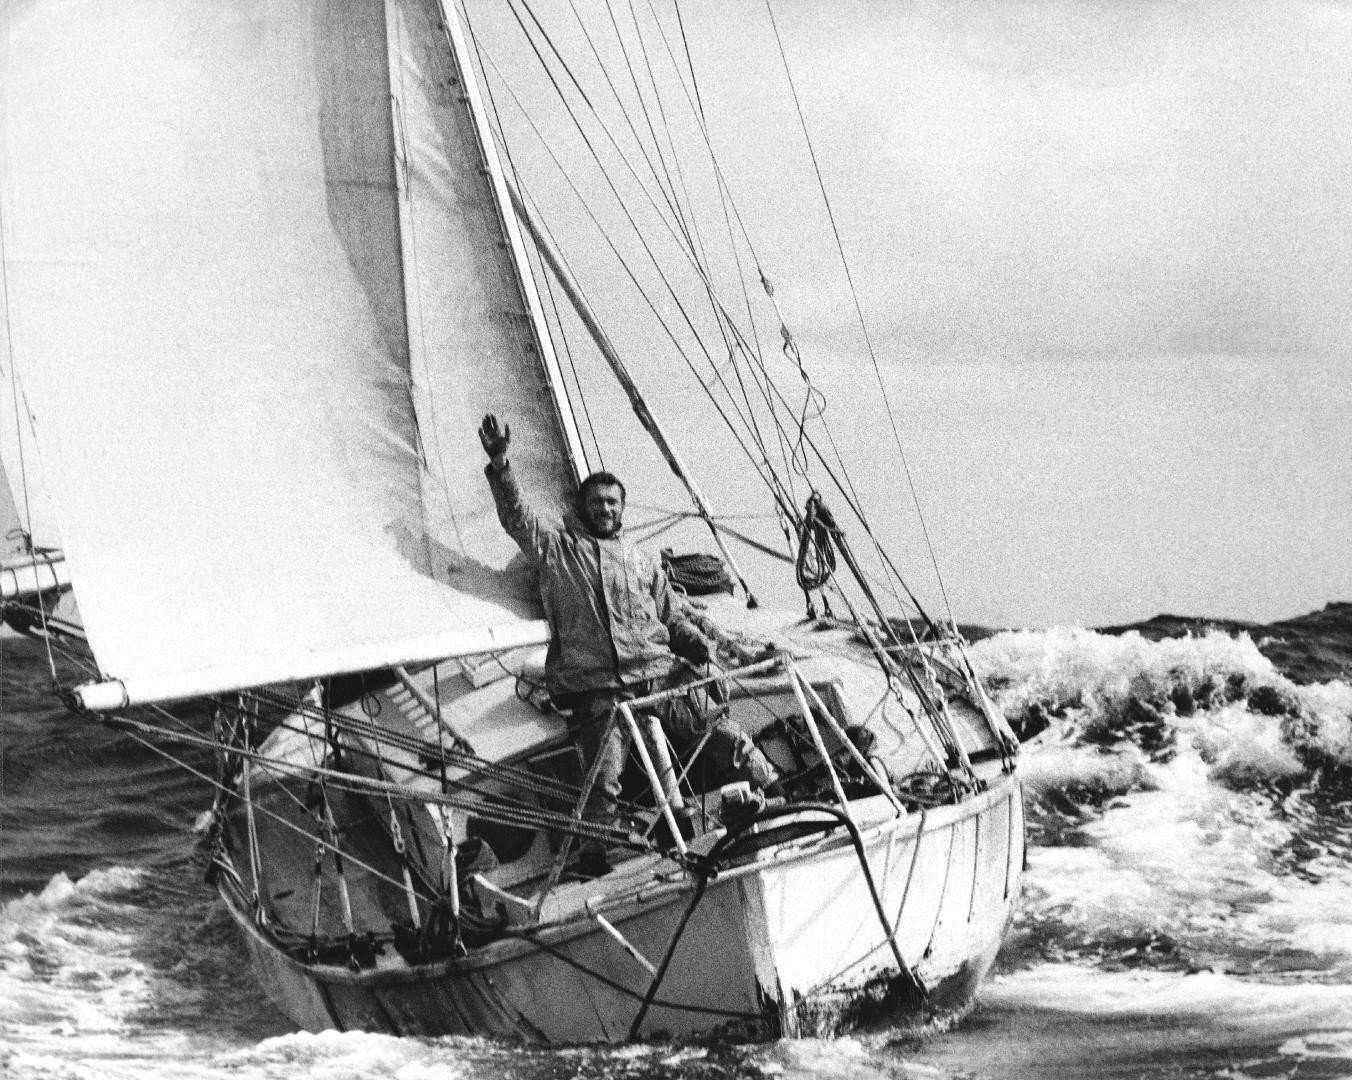 Sir Robin Knox-Johnston pictured by Bill Rowntree on April 22 1969 at the finish of the original Sunday Times Golden Globe Race